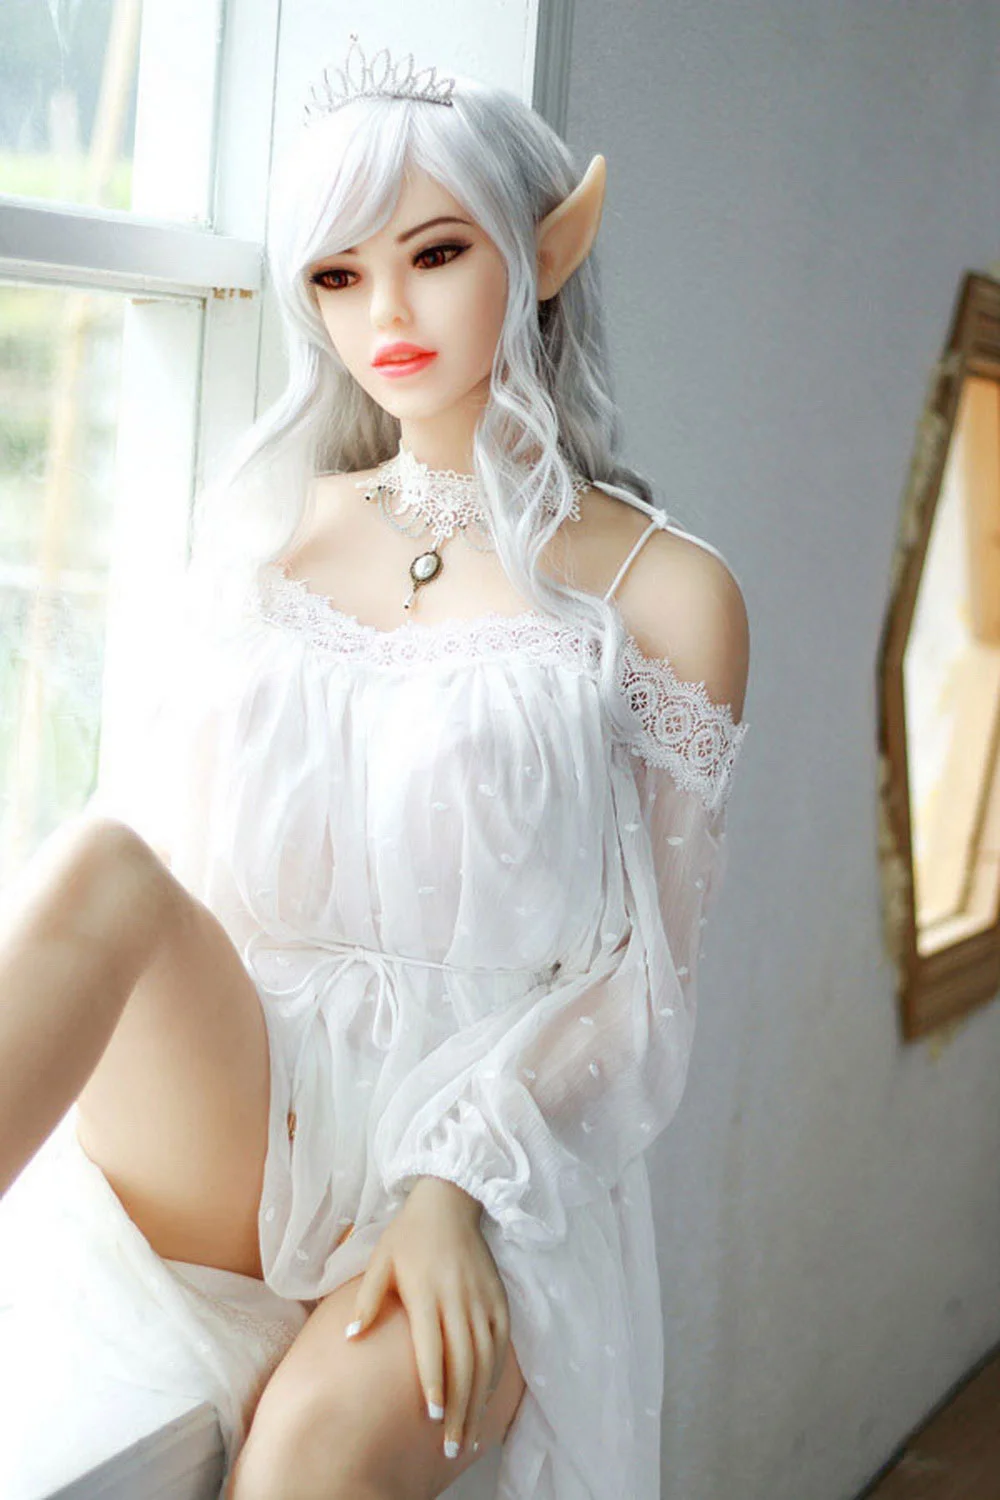 Anime sex doll sitting on the windowsill with hands on thighs